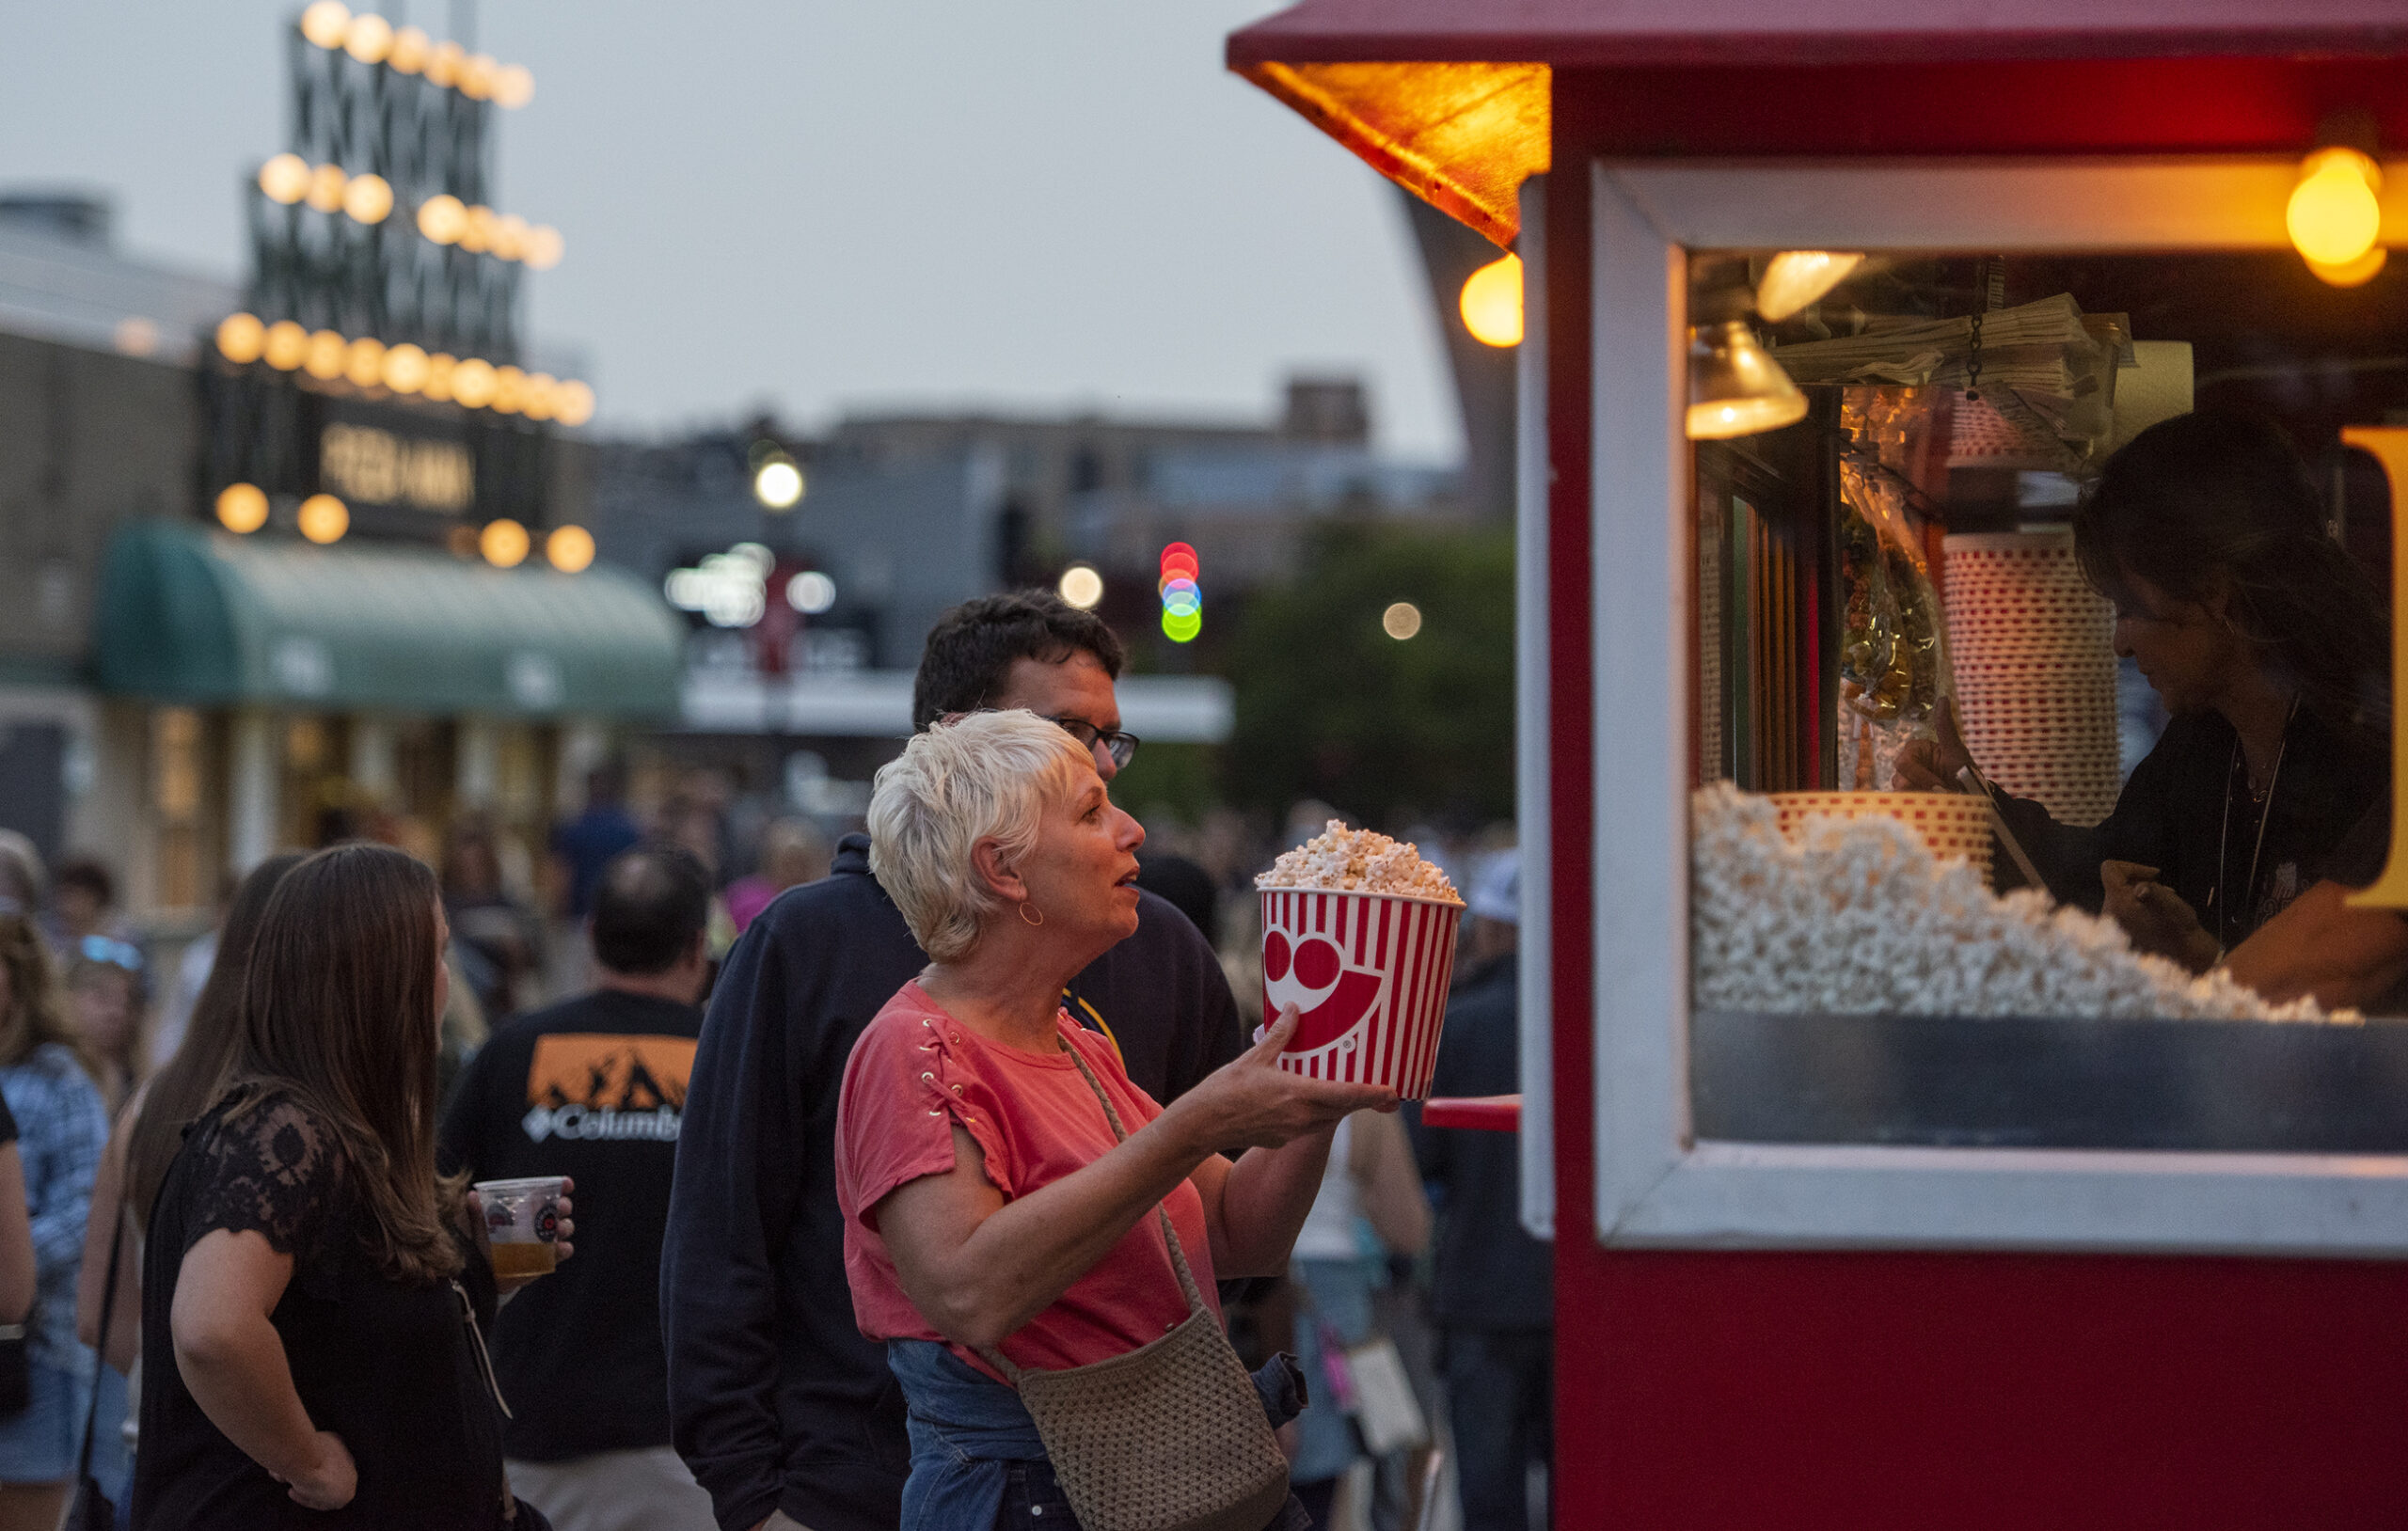 A woman receives a bucket of popcorn from a booth.